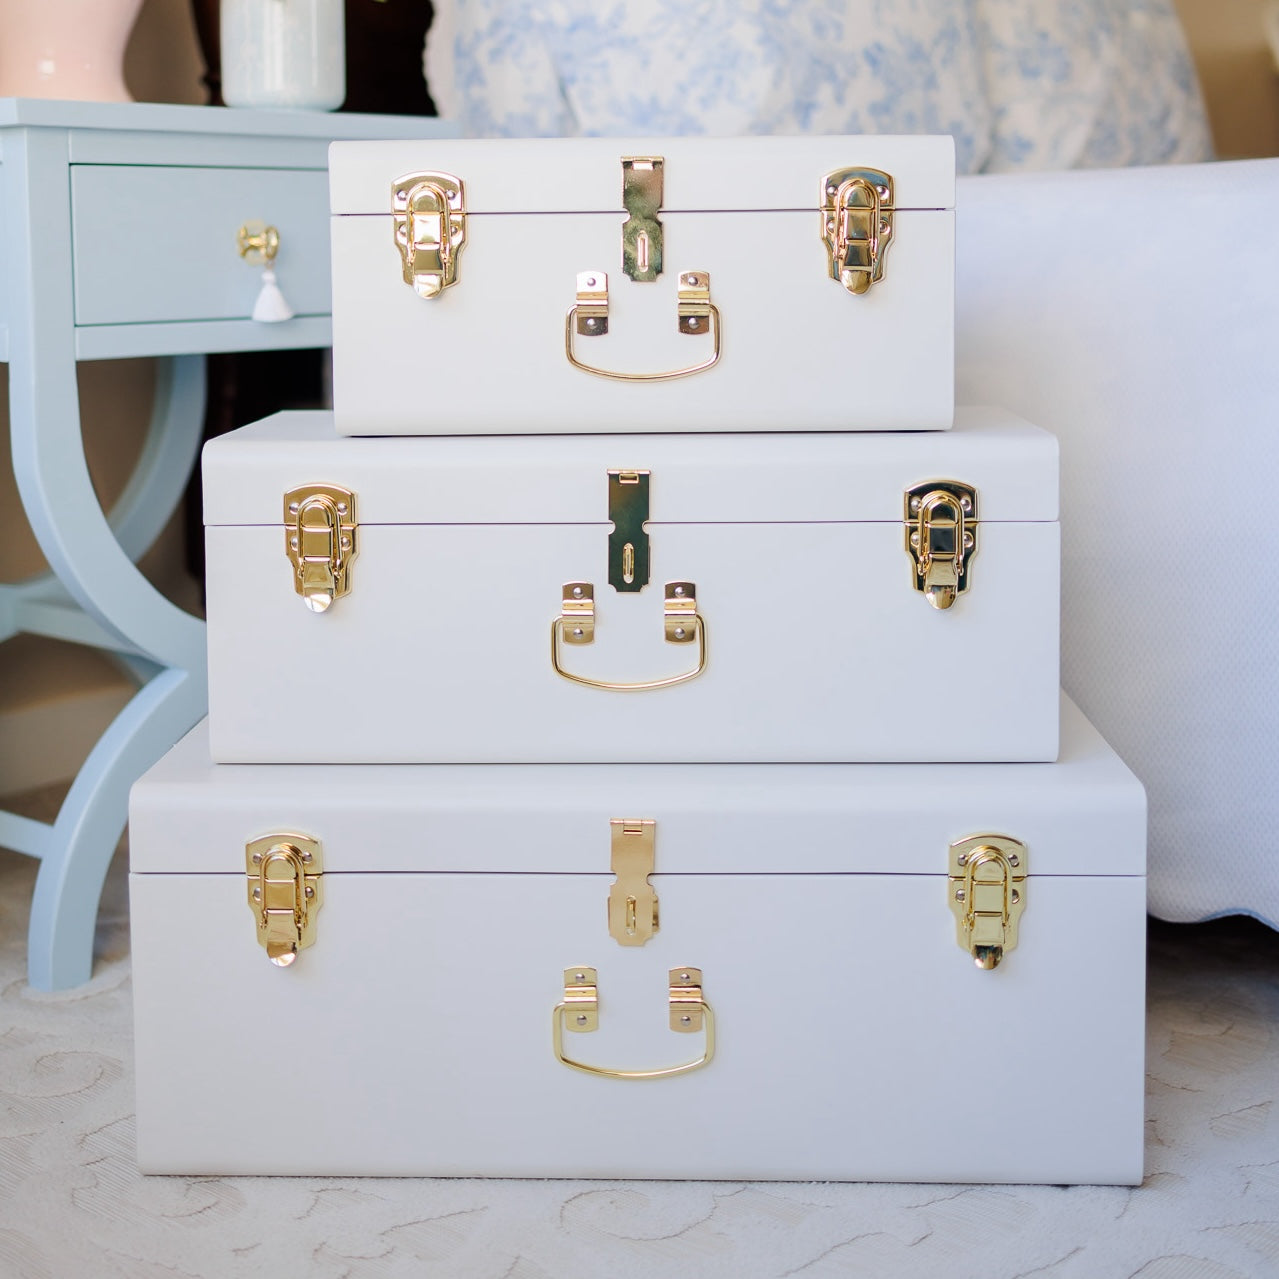 The PK Signature Trunk Set in Belle Meade Bow